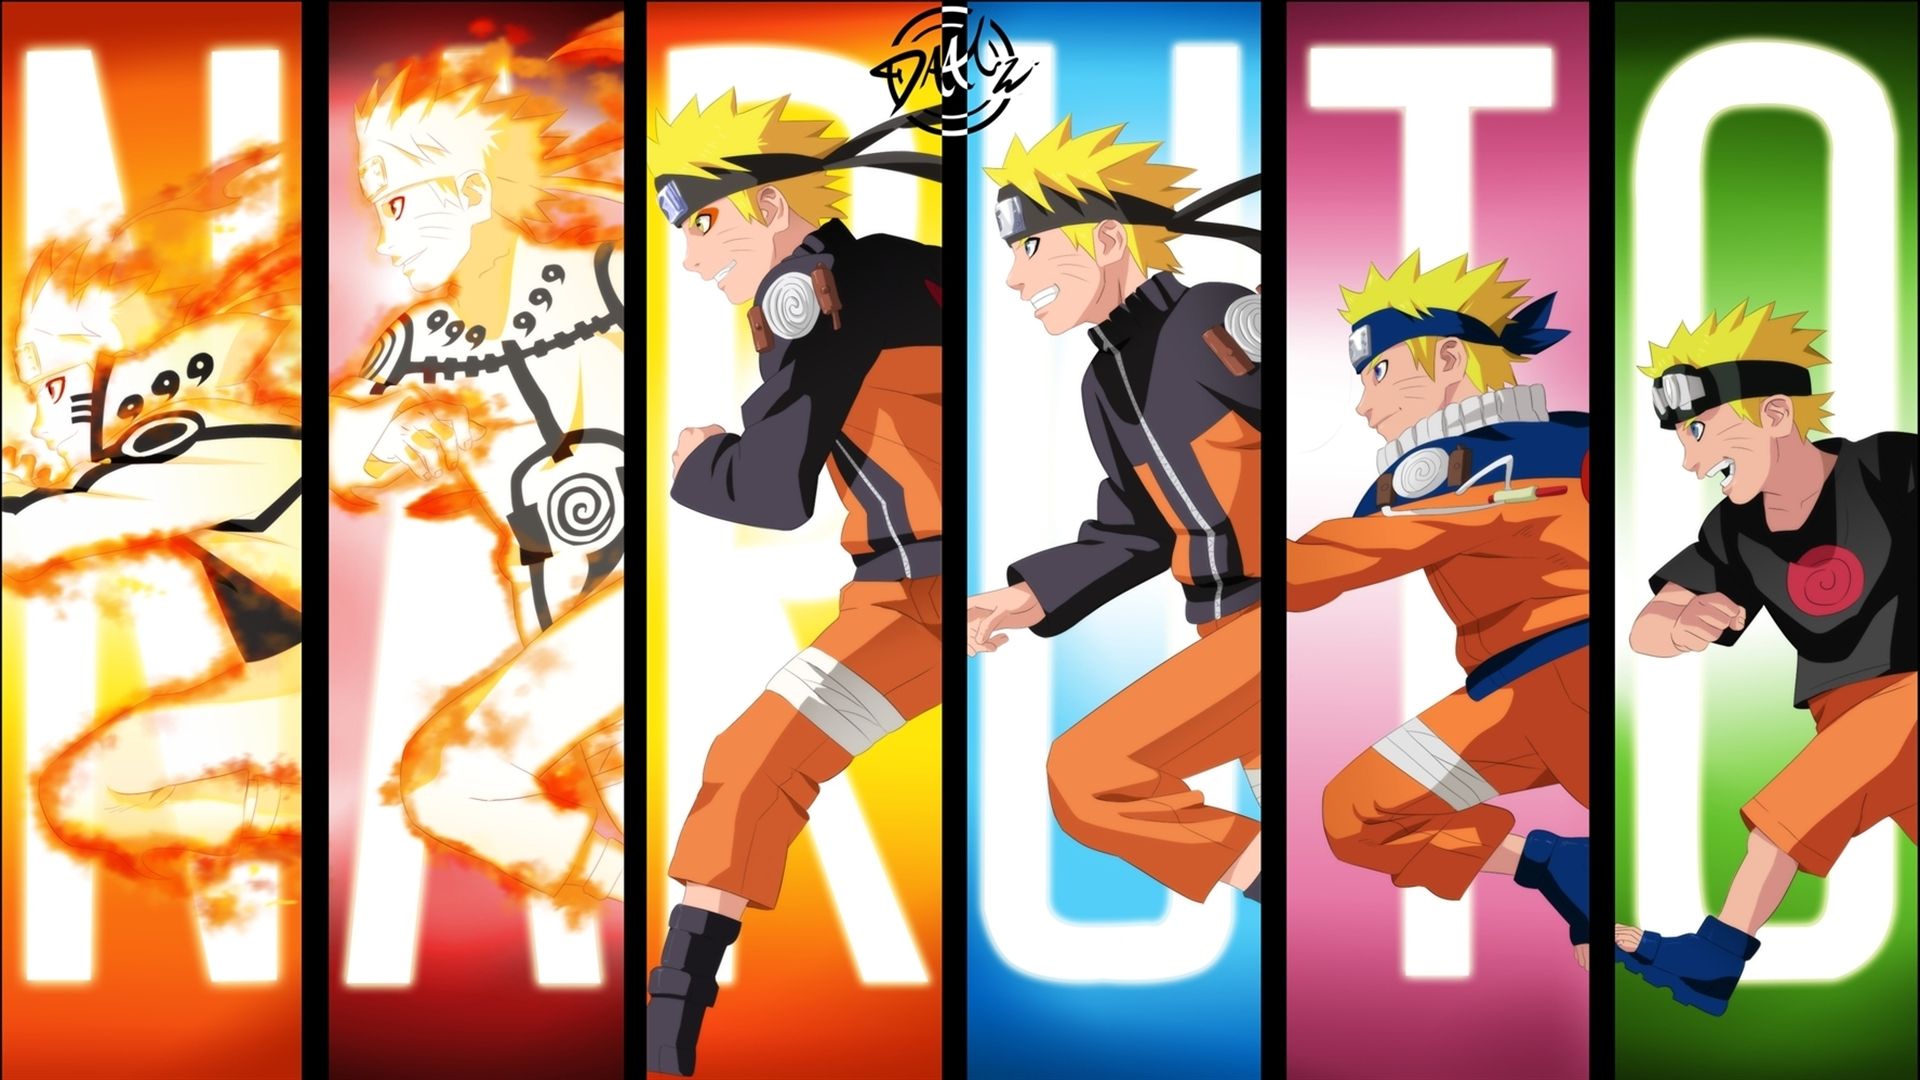 Free Download Naruto Shippuden All Characters Wallpapers Top Naruto 19x1080 For Your Desktop Mobile Tablet Explore 32 Generations Naruto Wallpapers Generations Naruto Wallpapers Sonic Generations Wallpaper Sonic Generations Wallpaper Hd